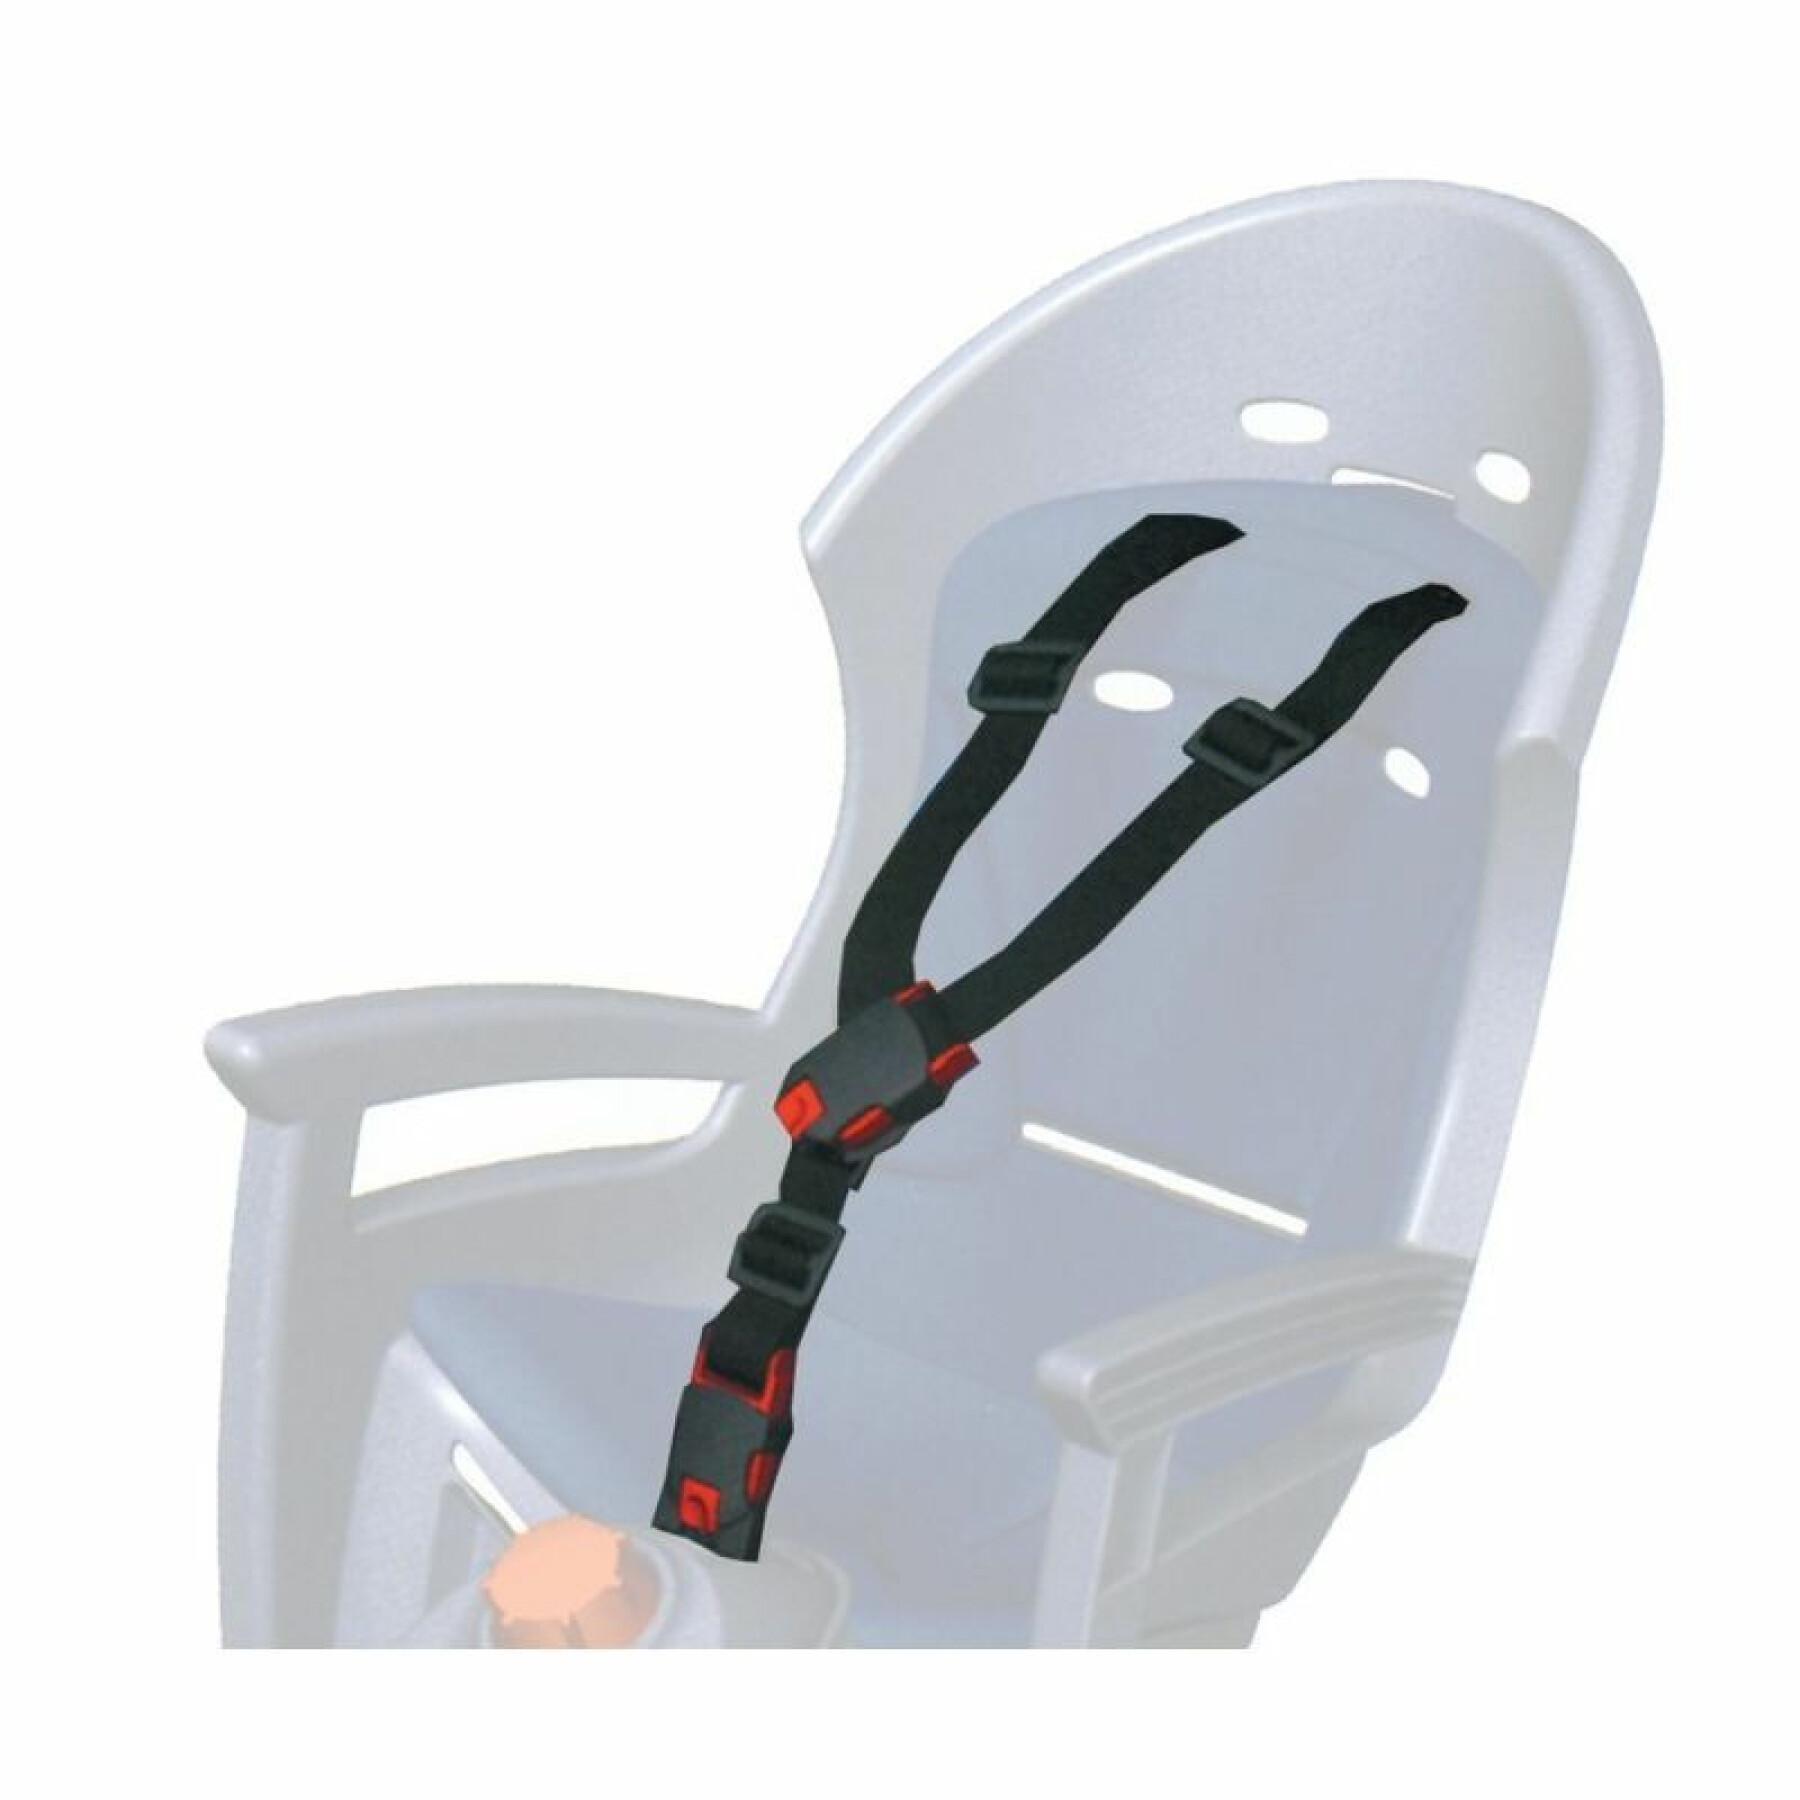 Safety harness for baby carriers Hamax Smiley/siesta